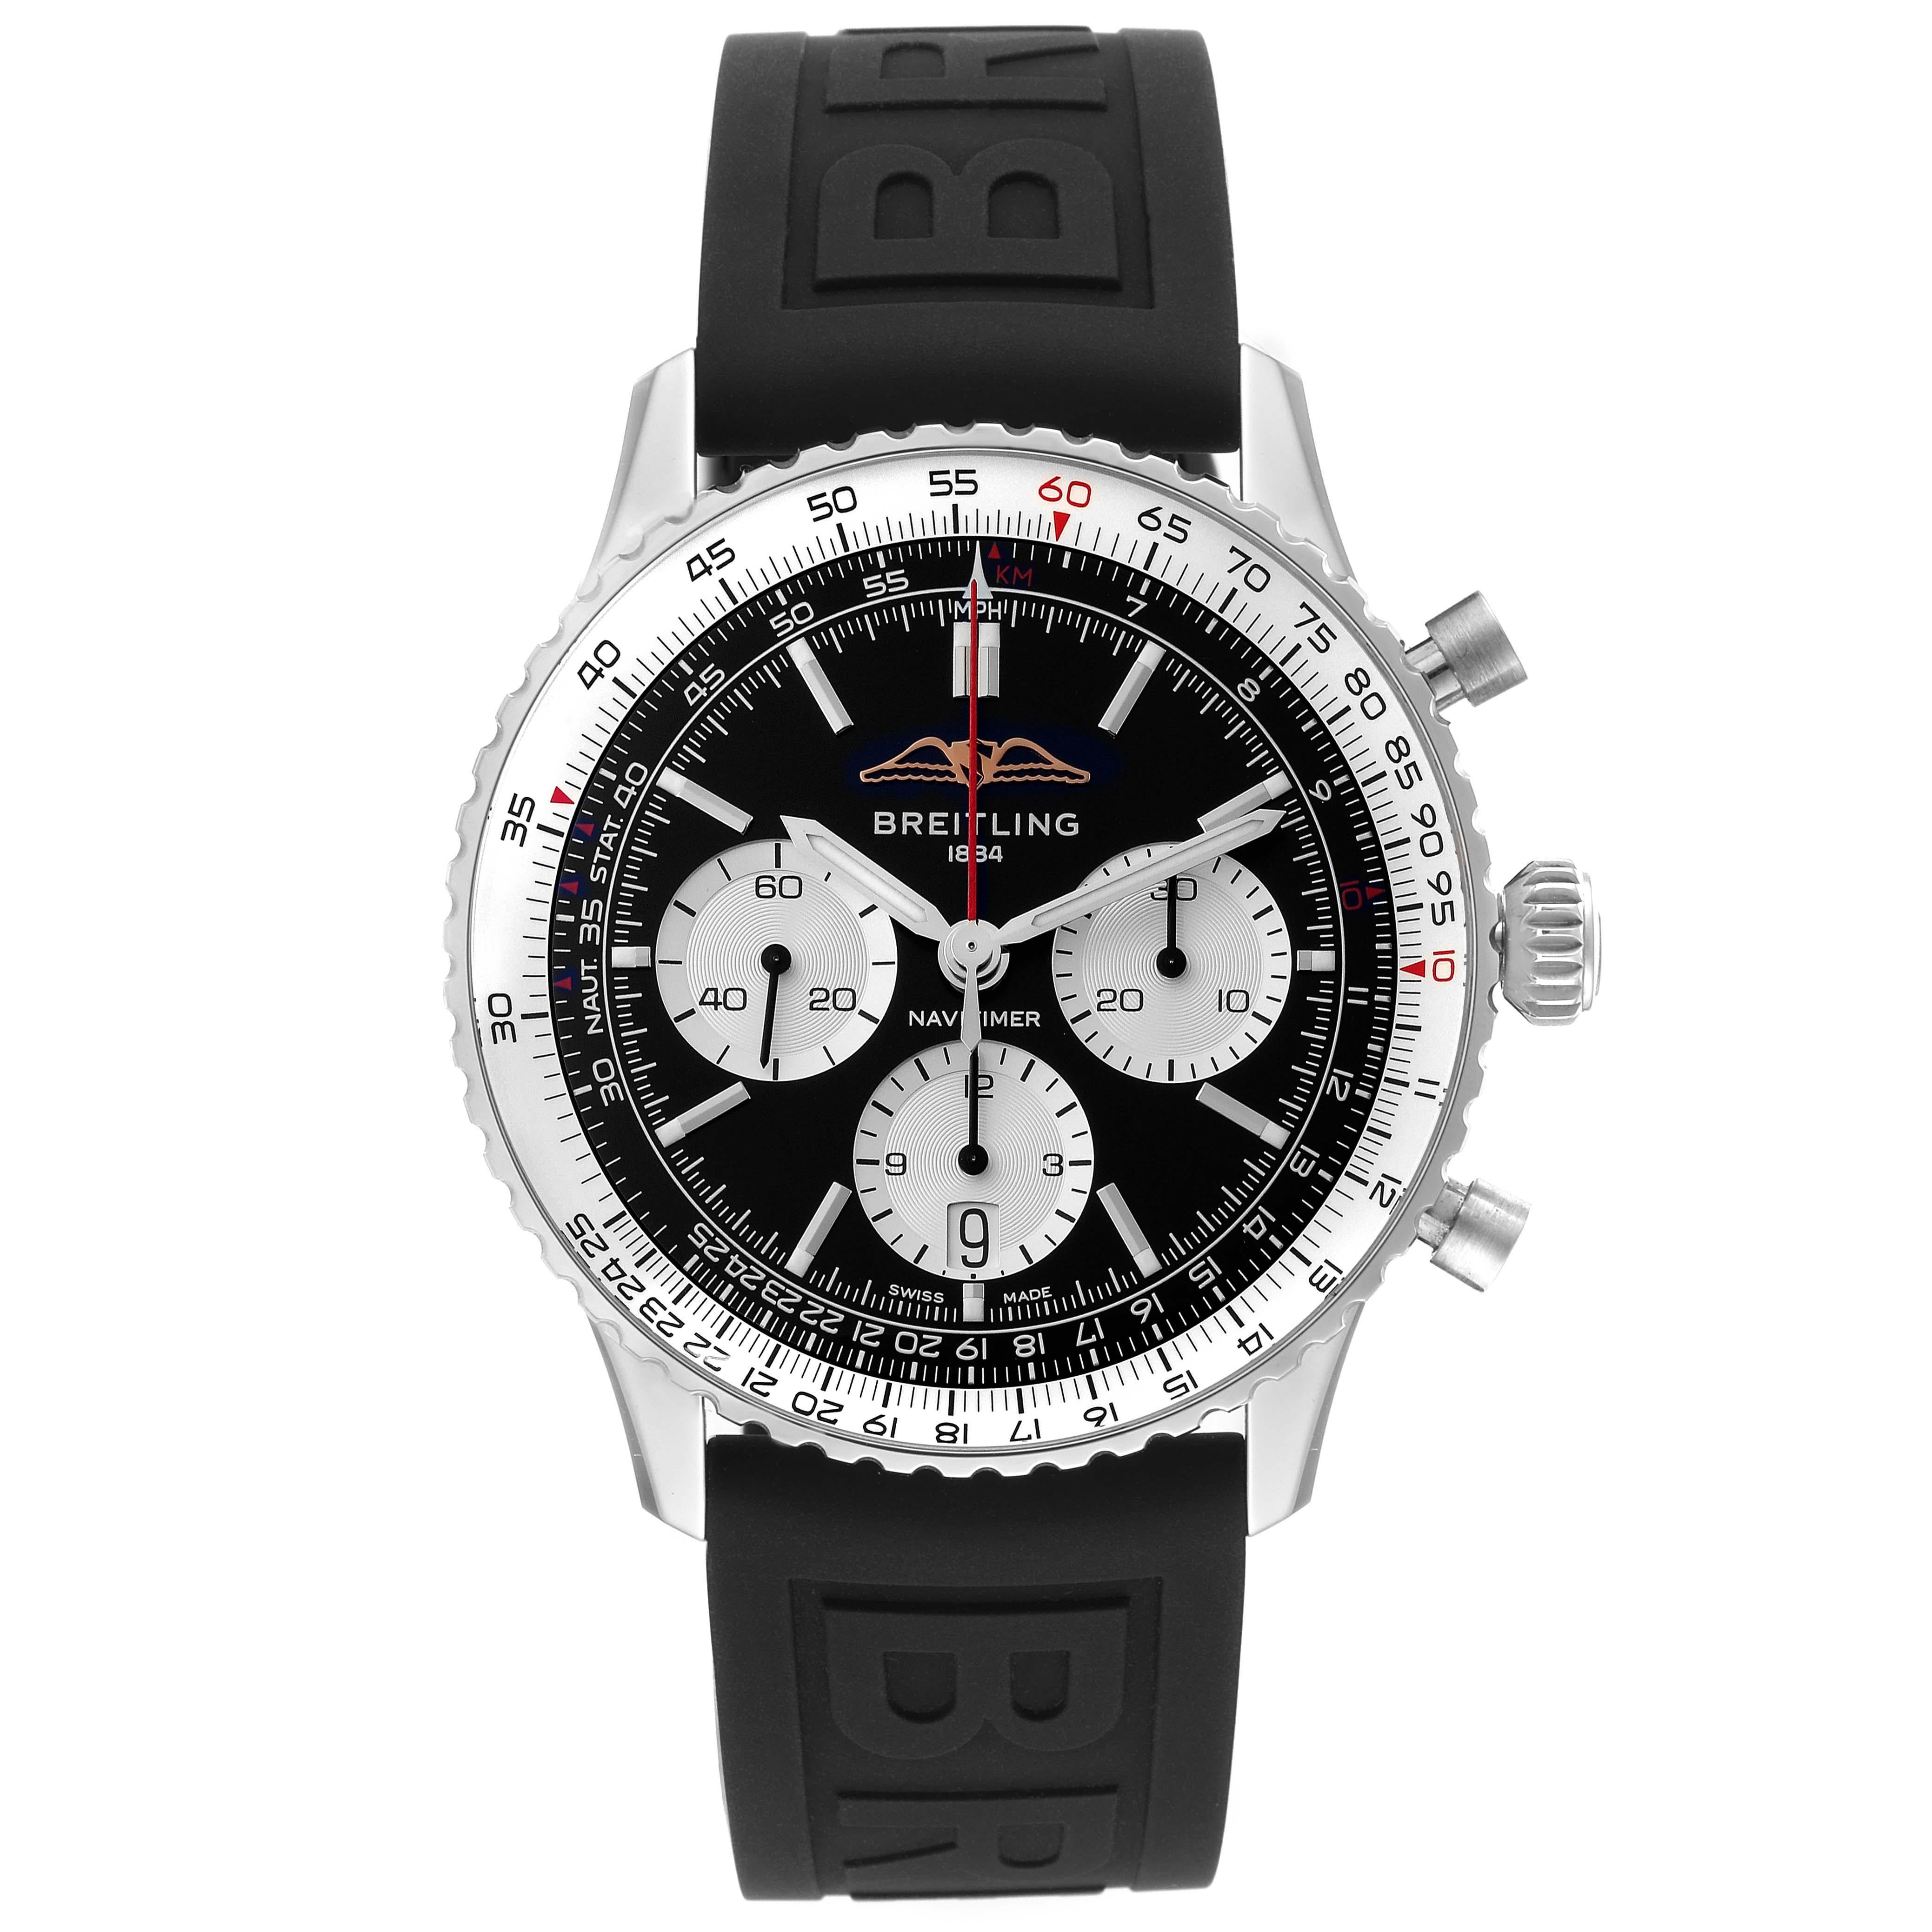 Breitling Navitimer B01 Black Dial Steel Mens Watch AB0138 Box Card. Self-winding automatic officially certified chronometer movement. Chronograph function. Stainless steel case 43 mm in diameter. Case thickness 14.25 mm. Exhibition sapphire